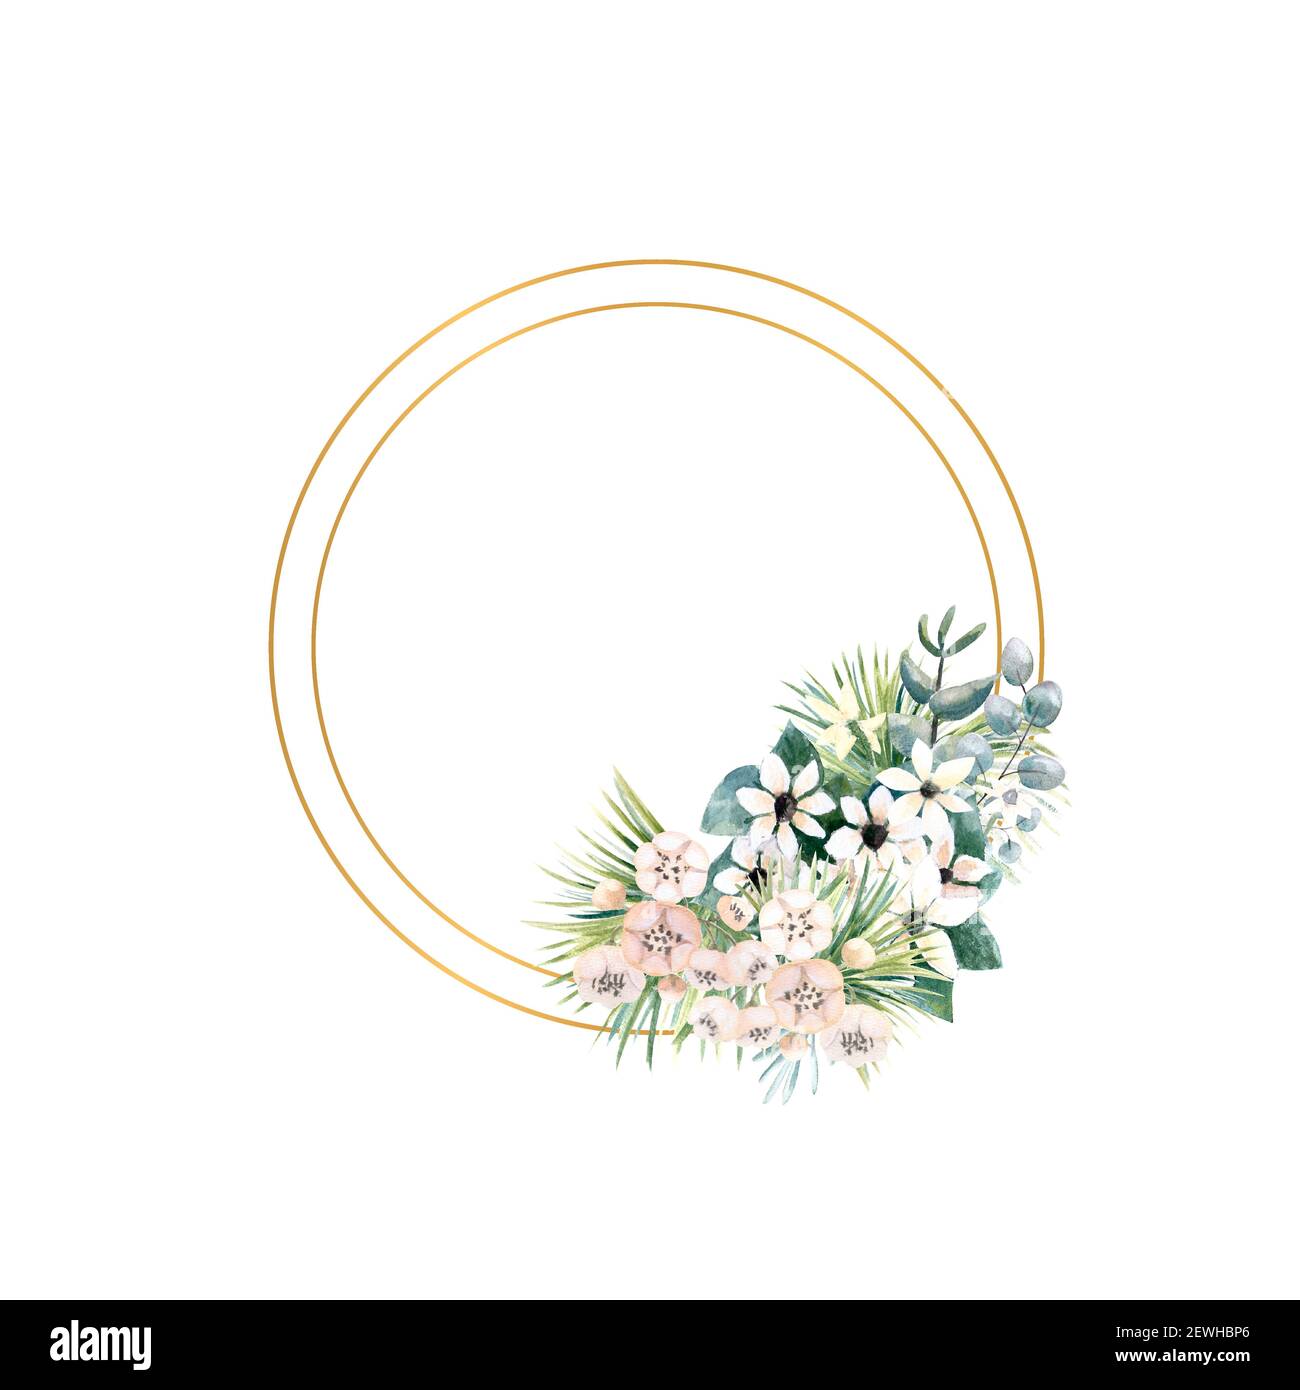 Round gold frame with small flowers of actinidia, bouvardia, tropical and palm leaves. Wedding bouquet in a frame for the design of a stylish Stock Photo